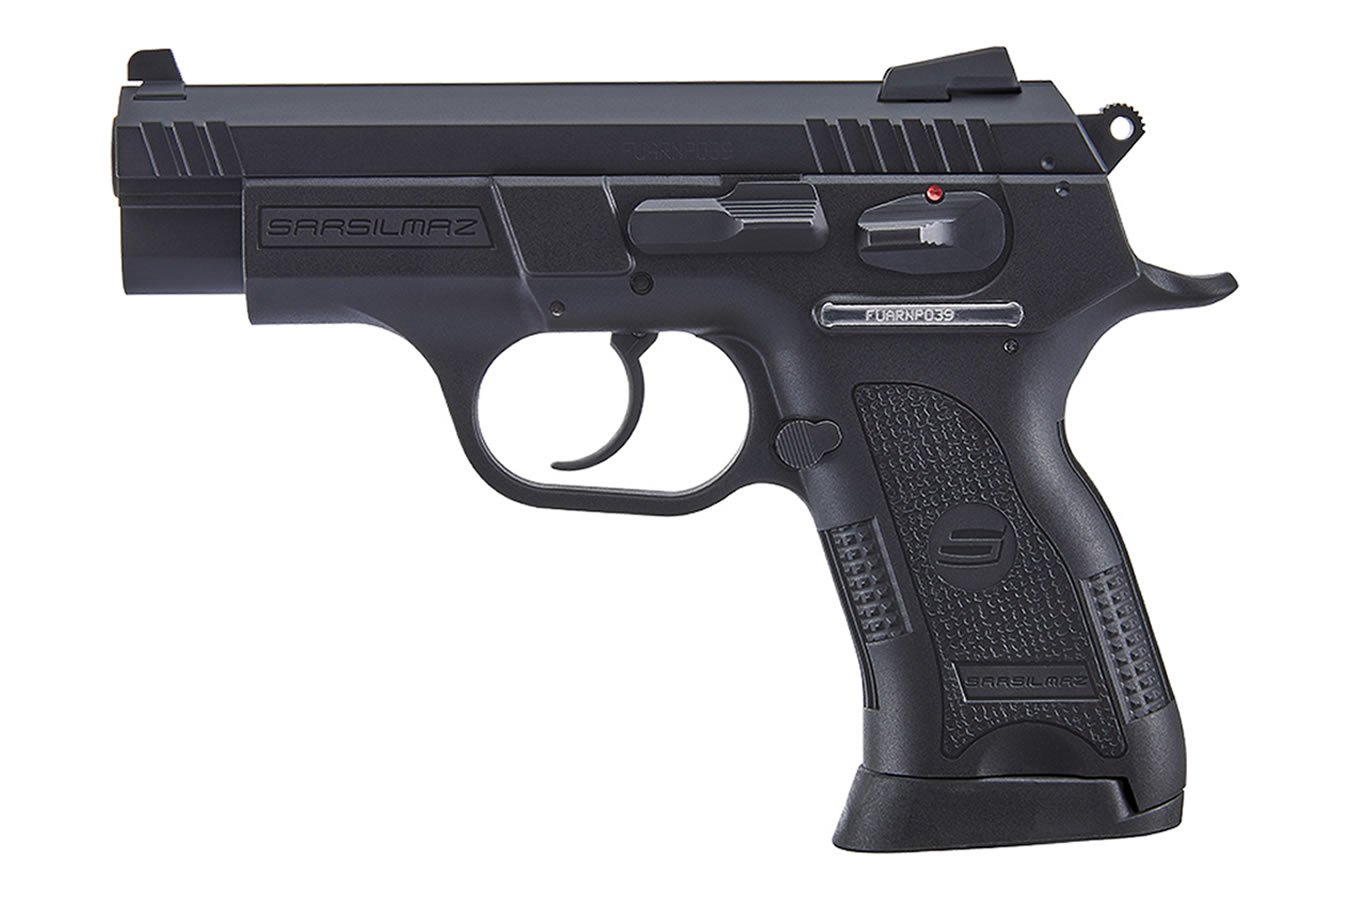 SAR ARMS B6C 9mm 13 Rd - $282.99 (Free S/H over $49)